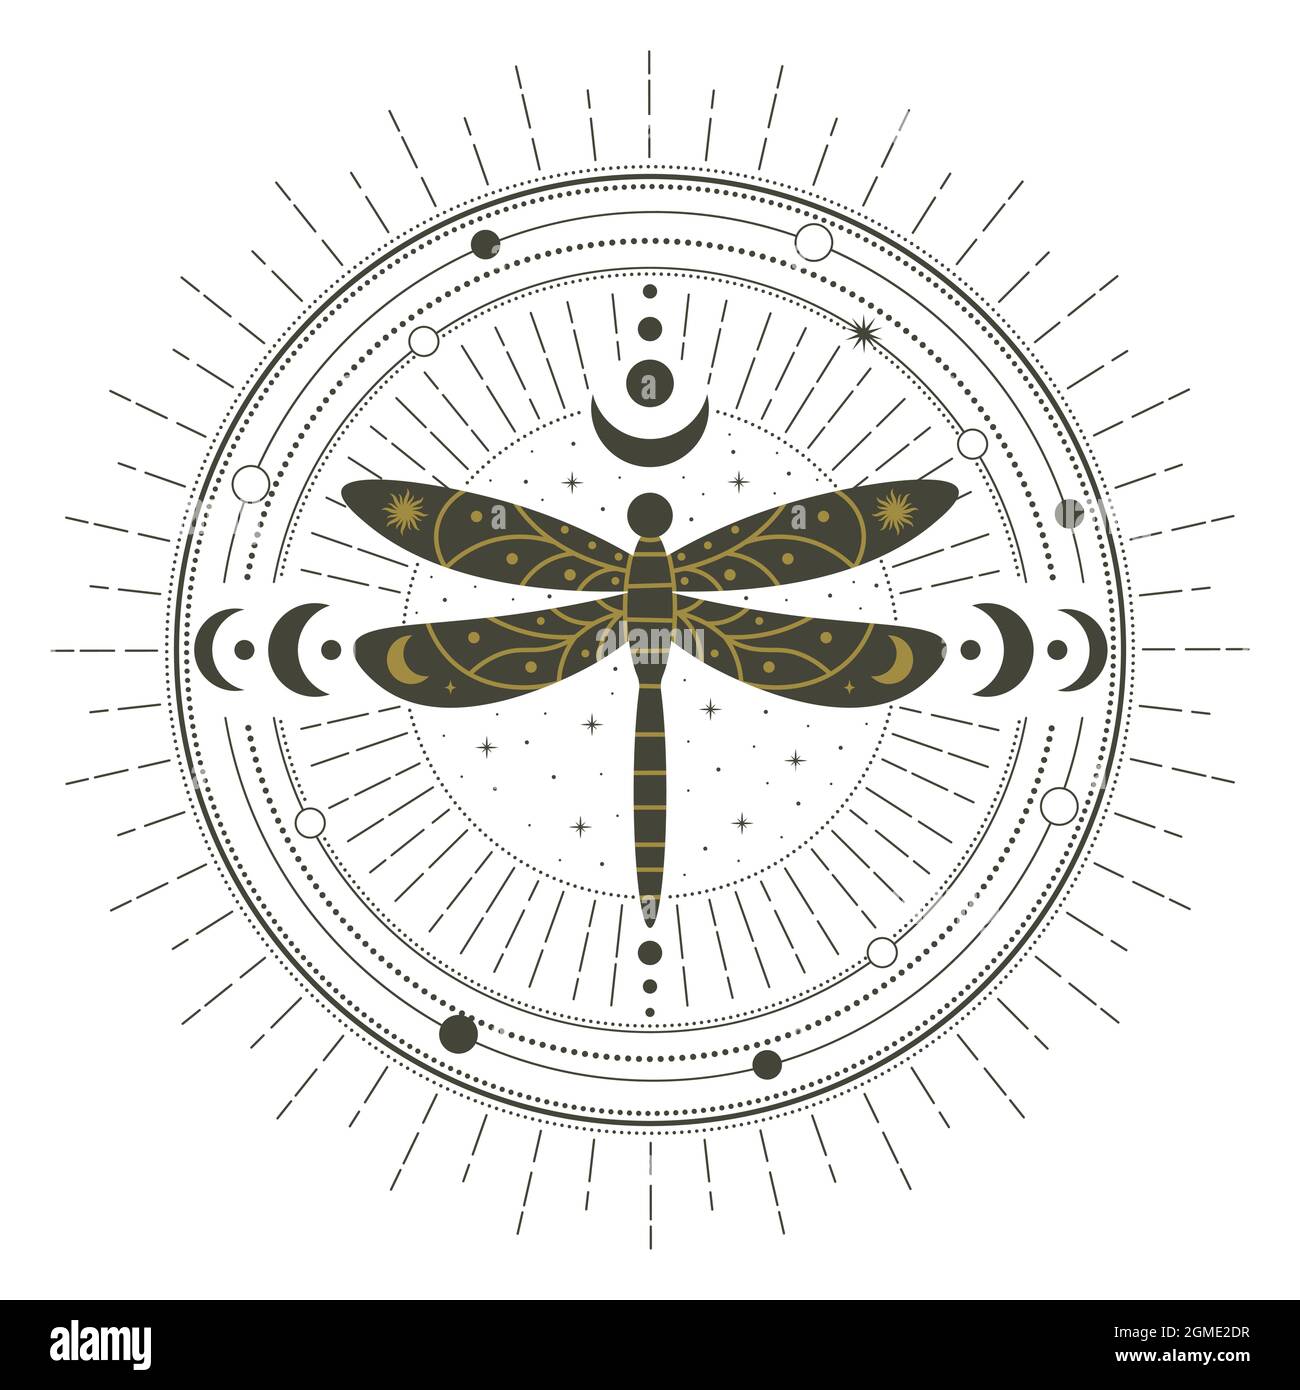 Magical witchcraft dragonfly insect mystical spell circle. Witchcraft magic spell circle, mystical dragonfly symbol vector illustration. Abstract Stock Vector